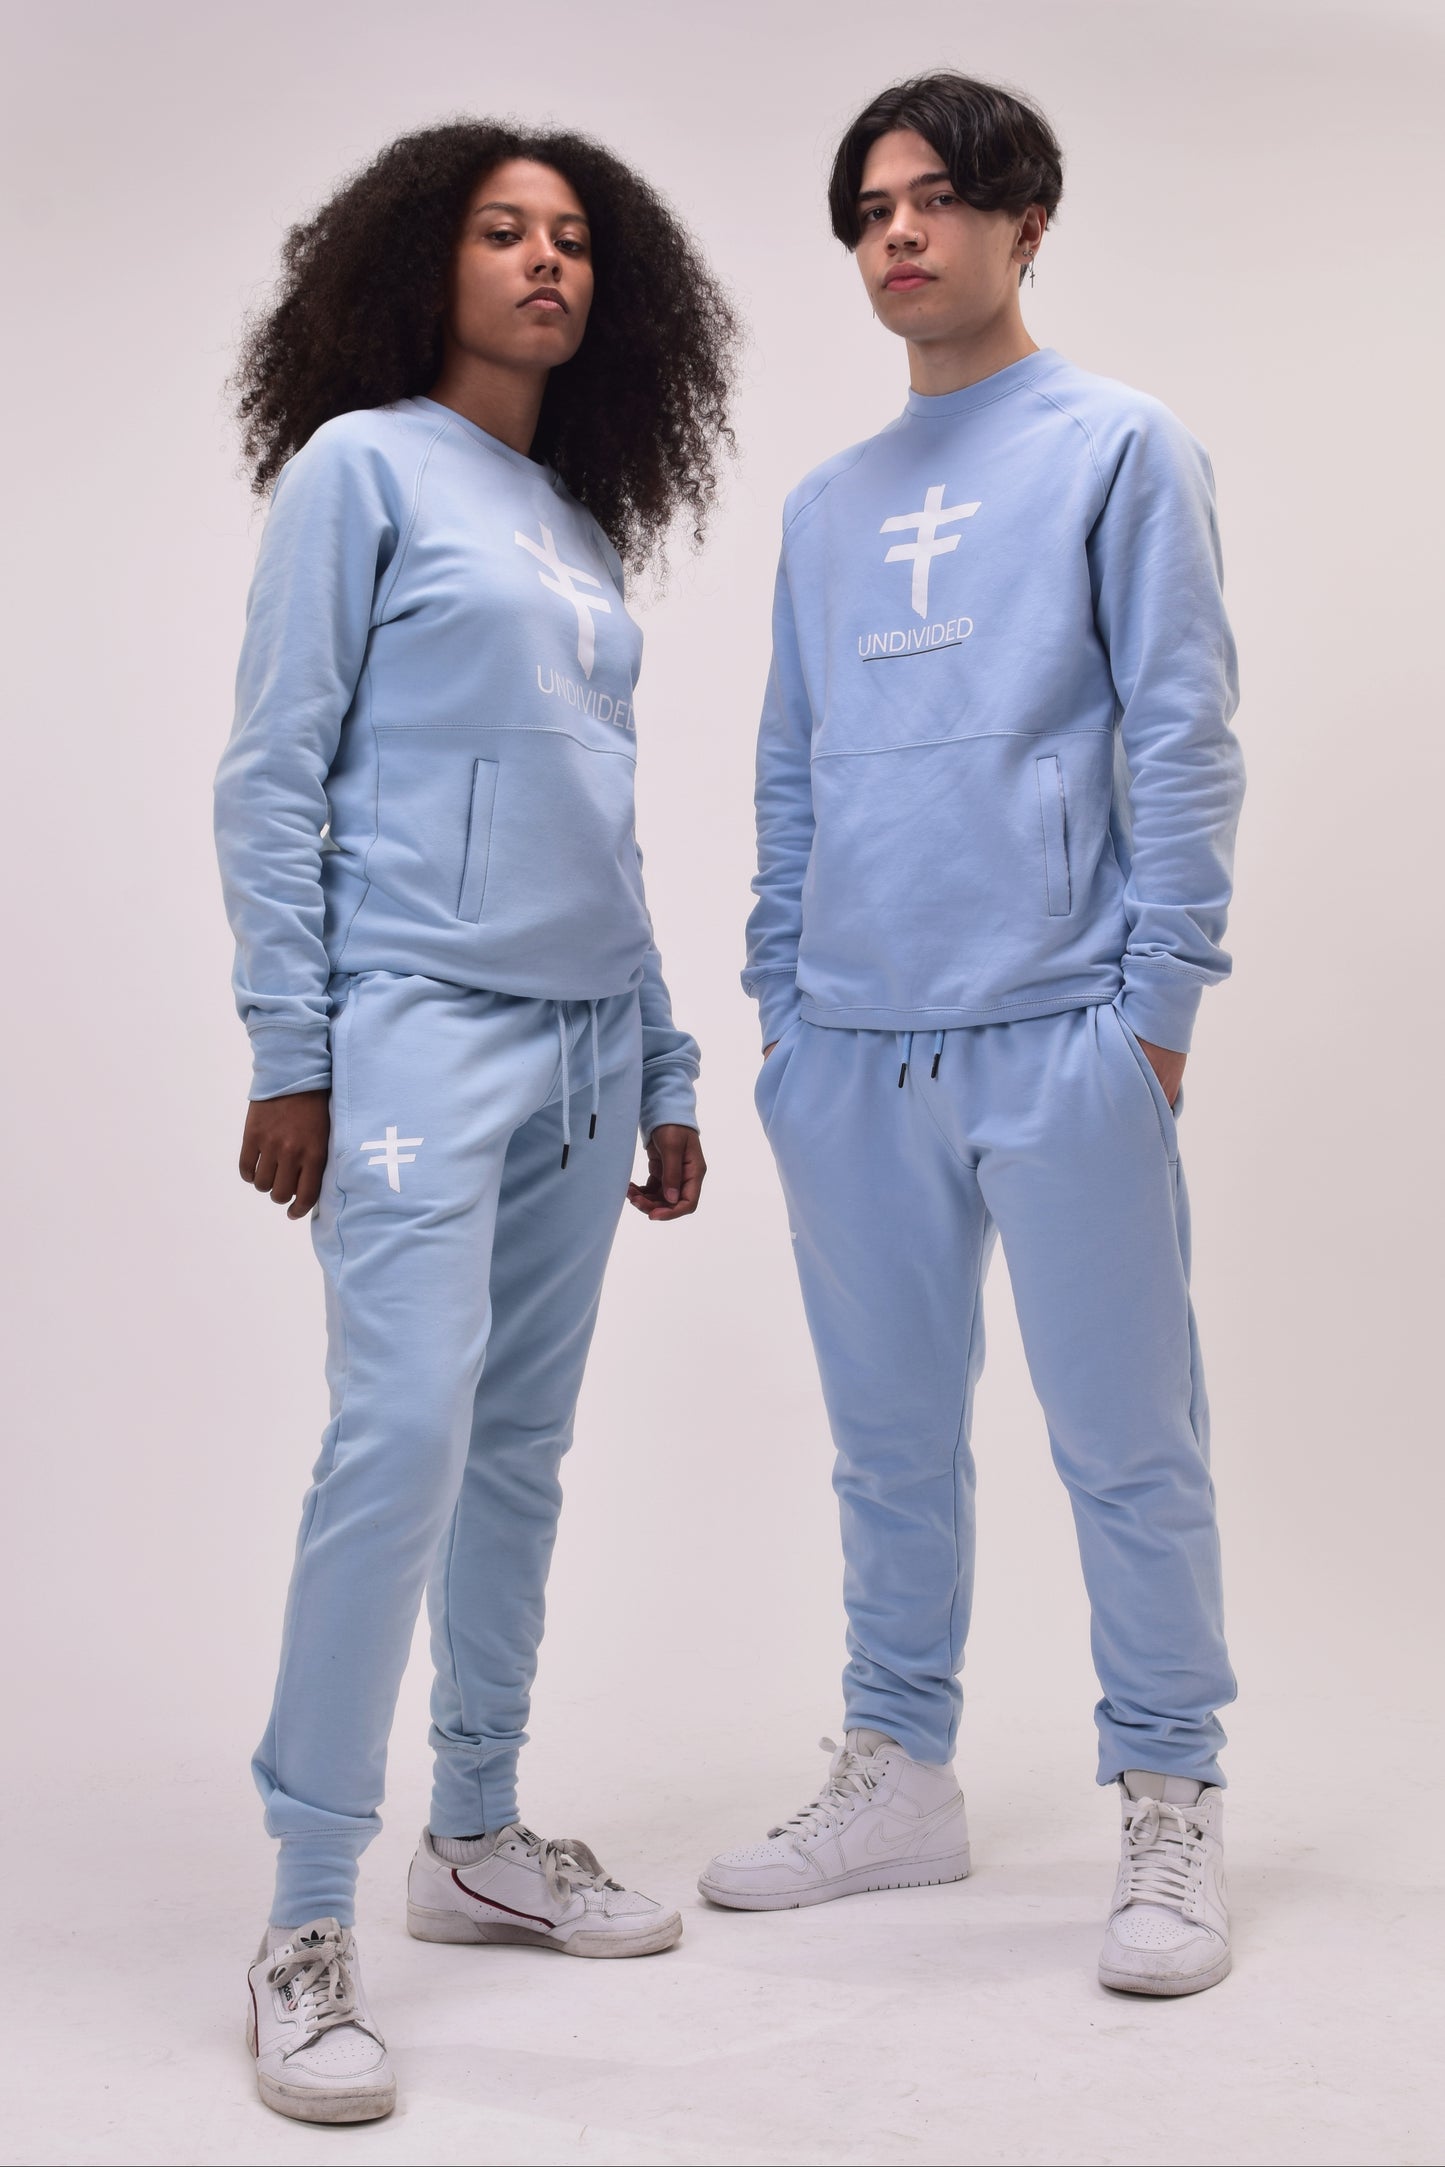 UNDIVIDED Baby Blue Sweat Top Tracksuit With Classic Print (Unisex)